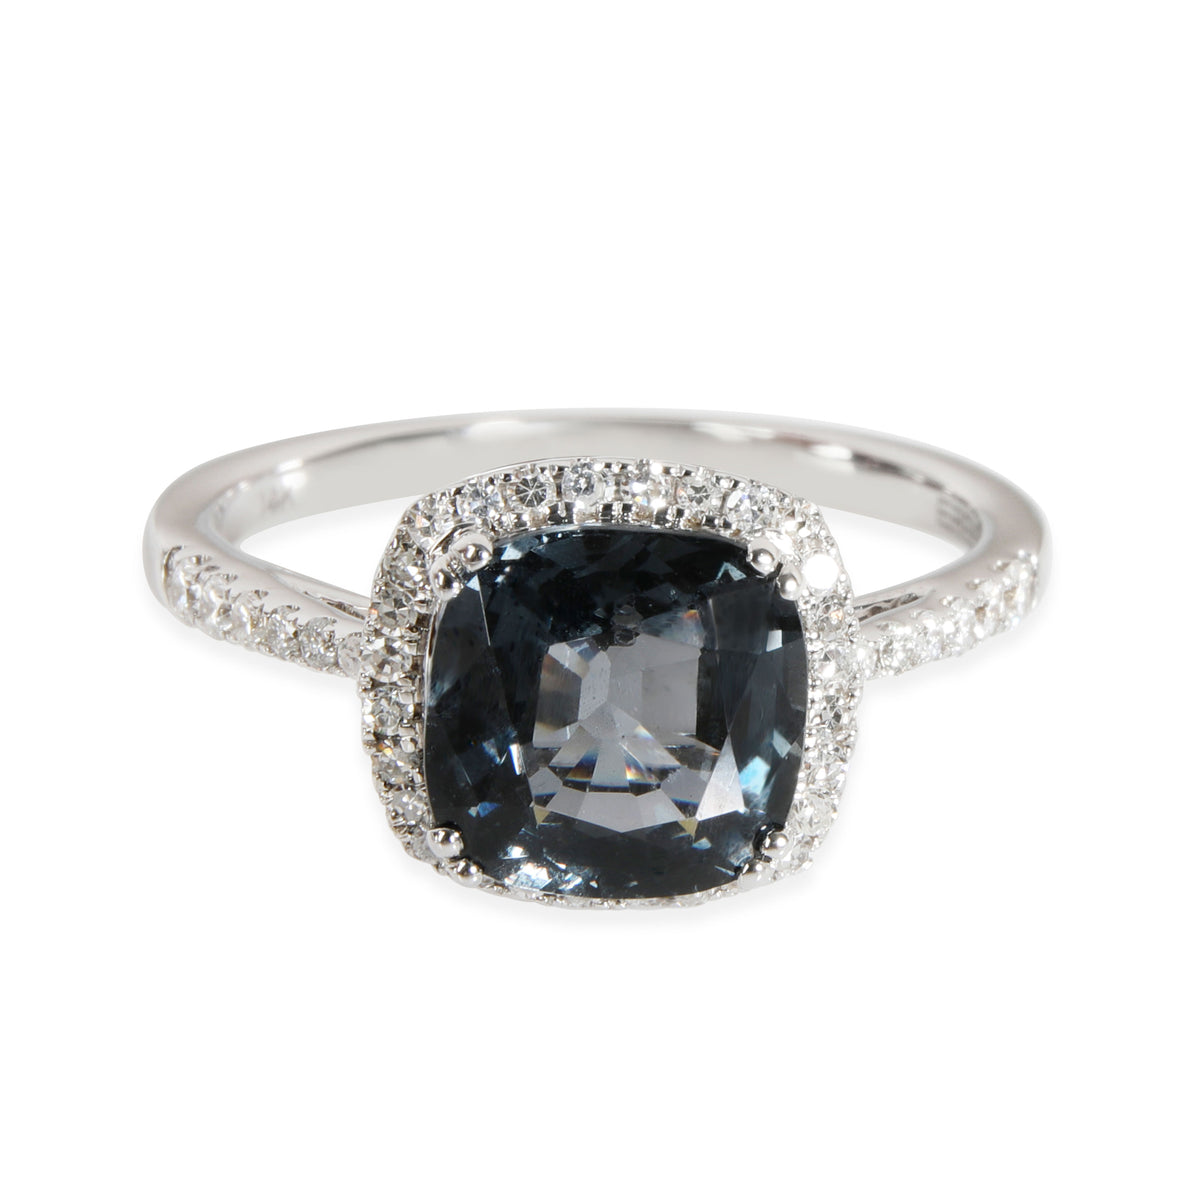 Spinel Diamond Halo Ring in 14K White Gold 0.25 CTW